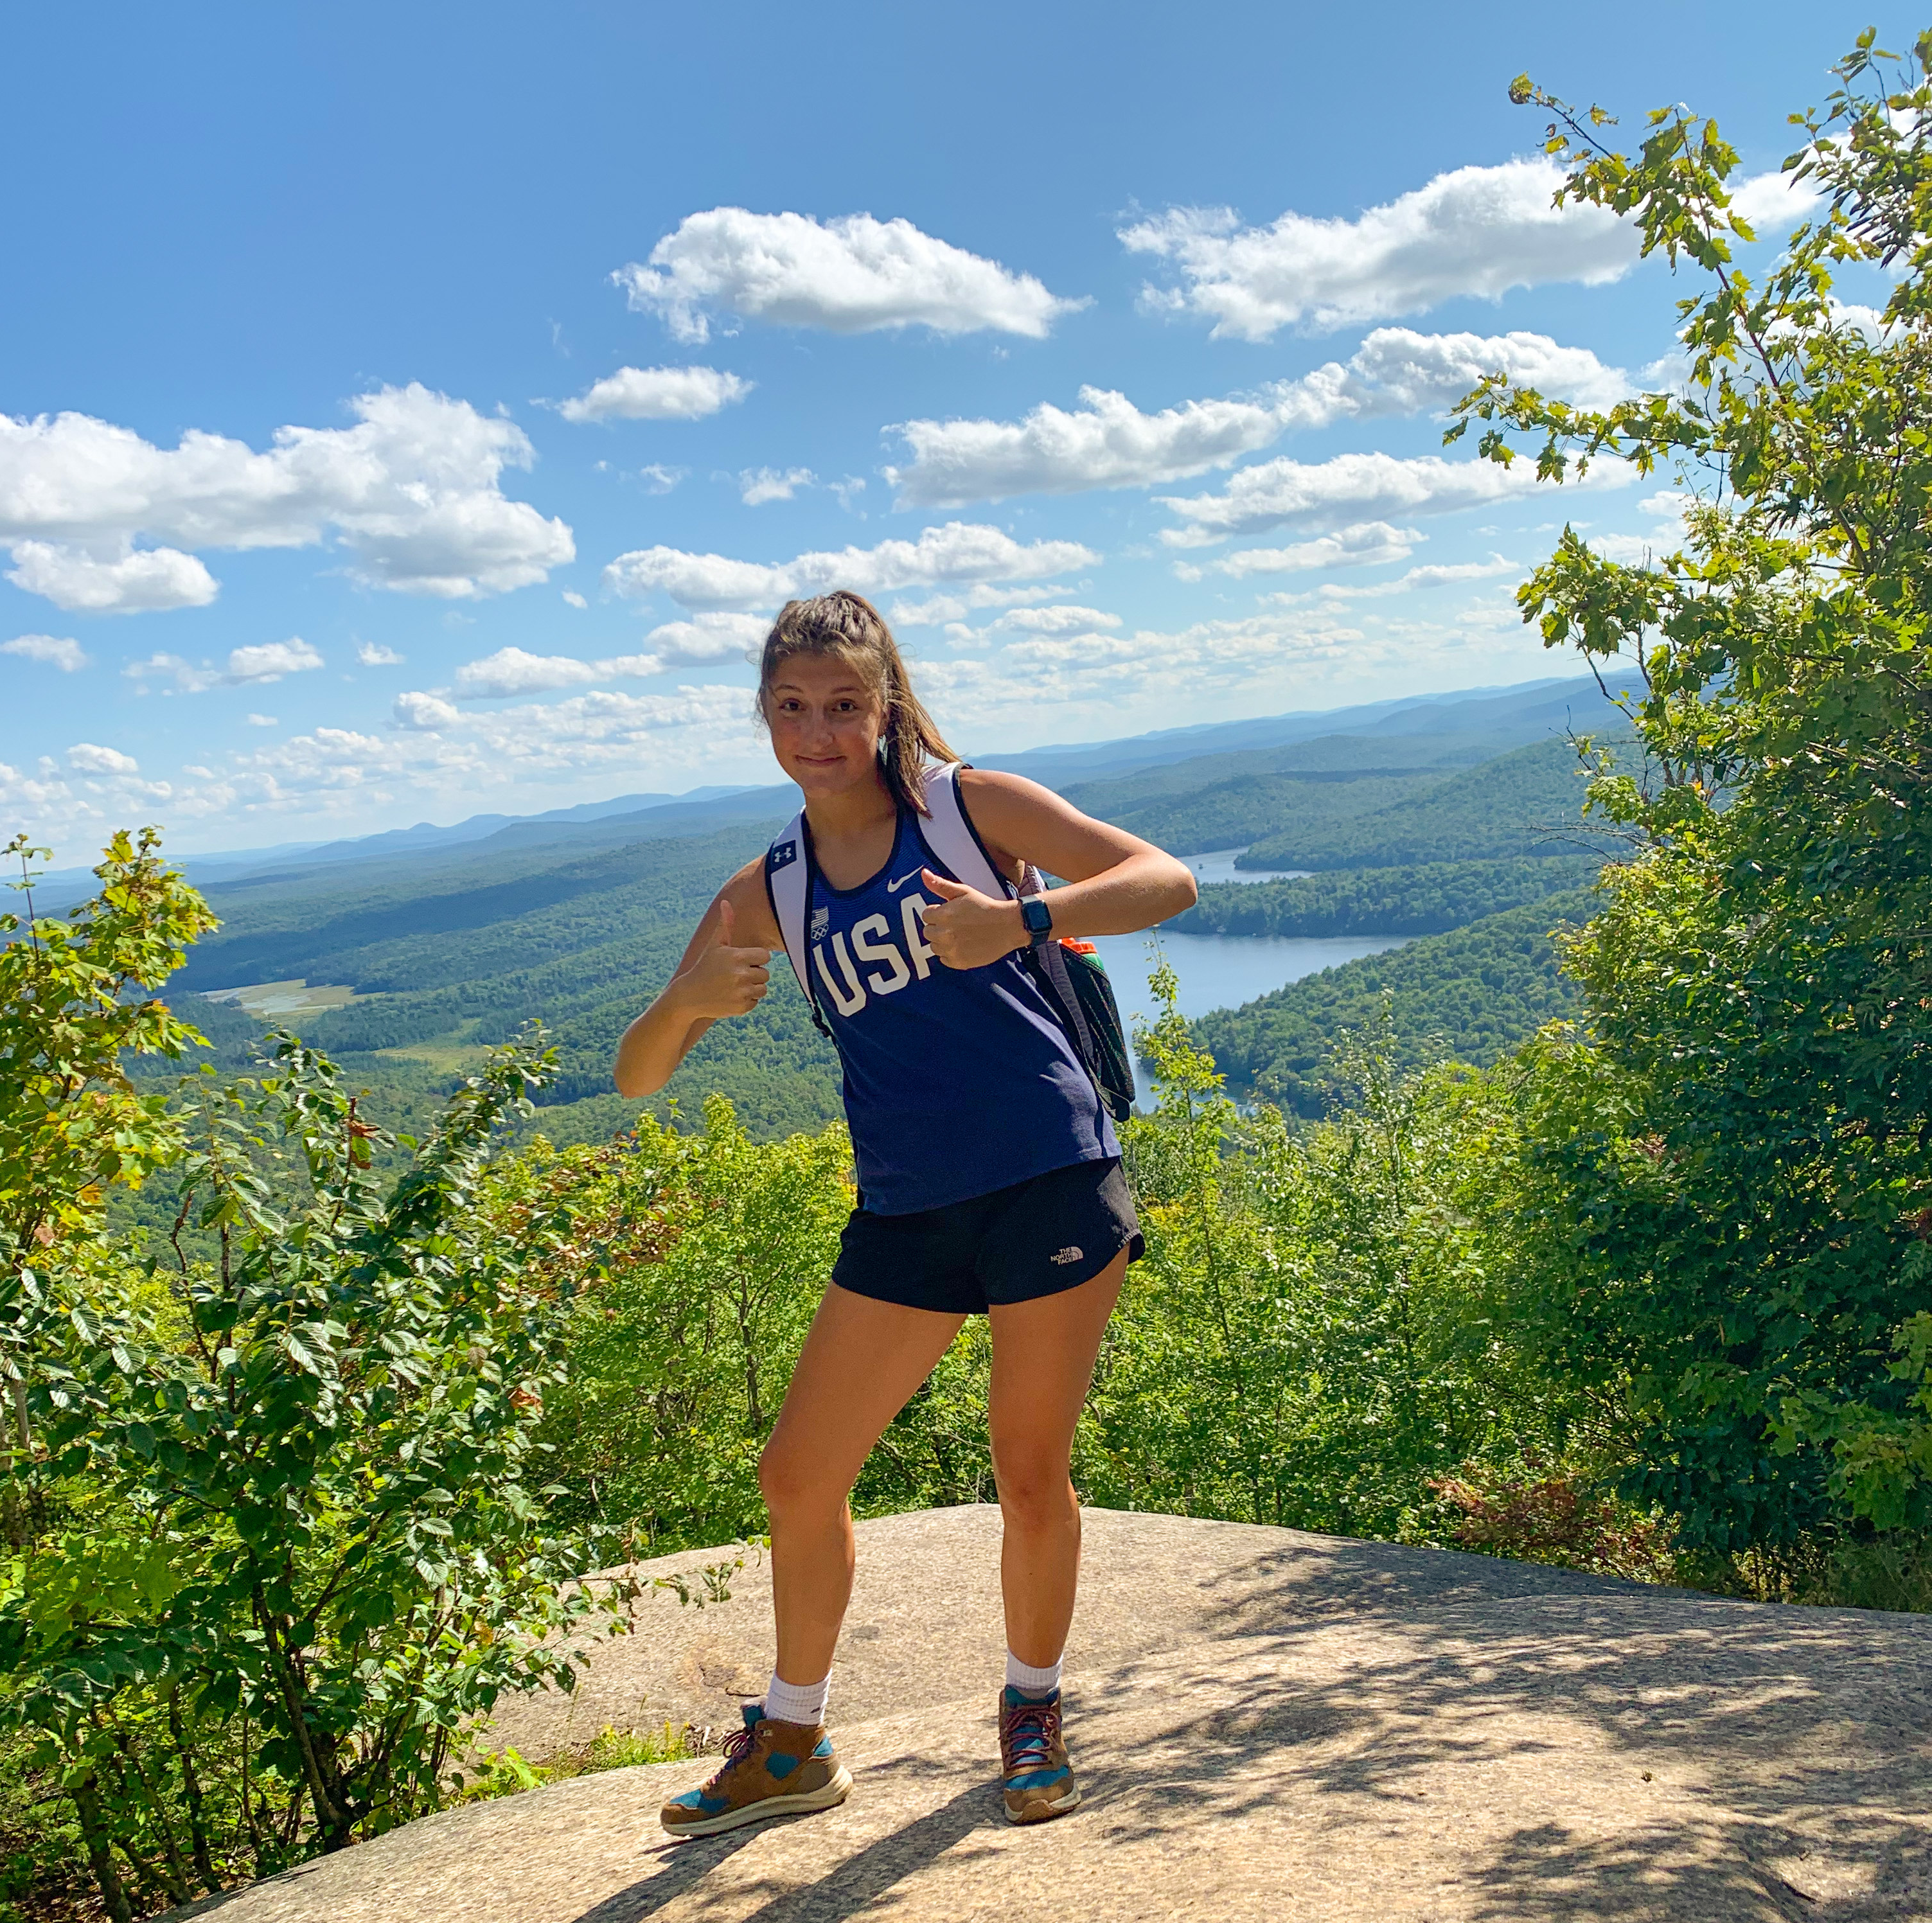 A student in a blue tanktop poses with both thumbs up on a mountaintop on a sunny day.